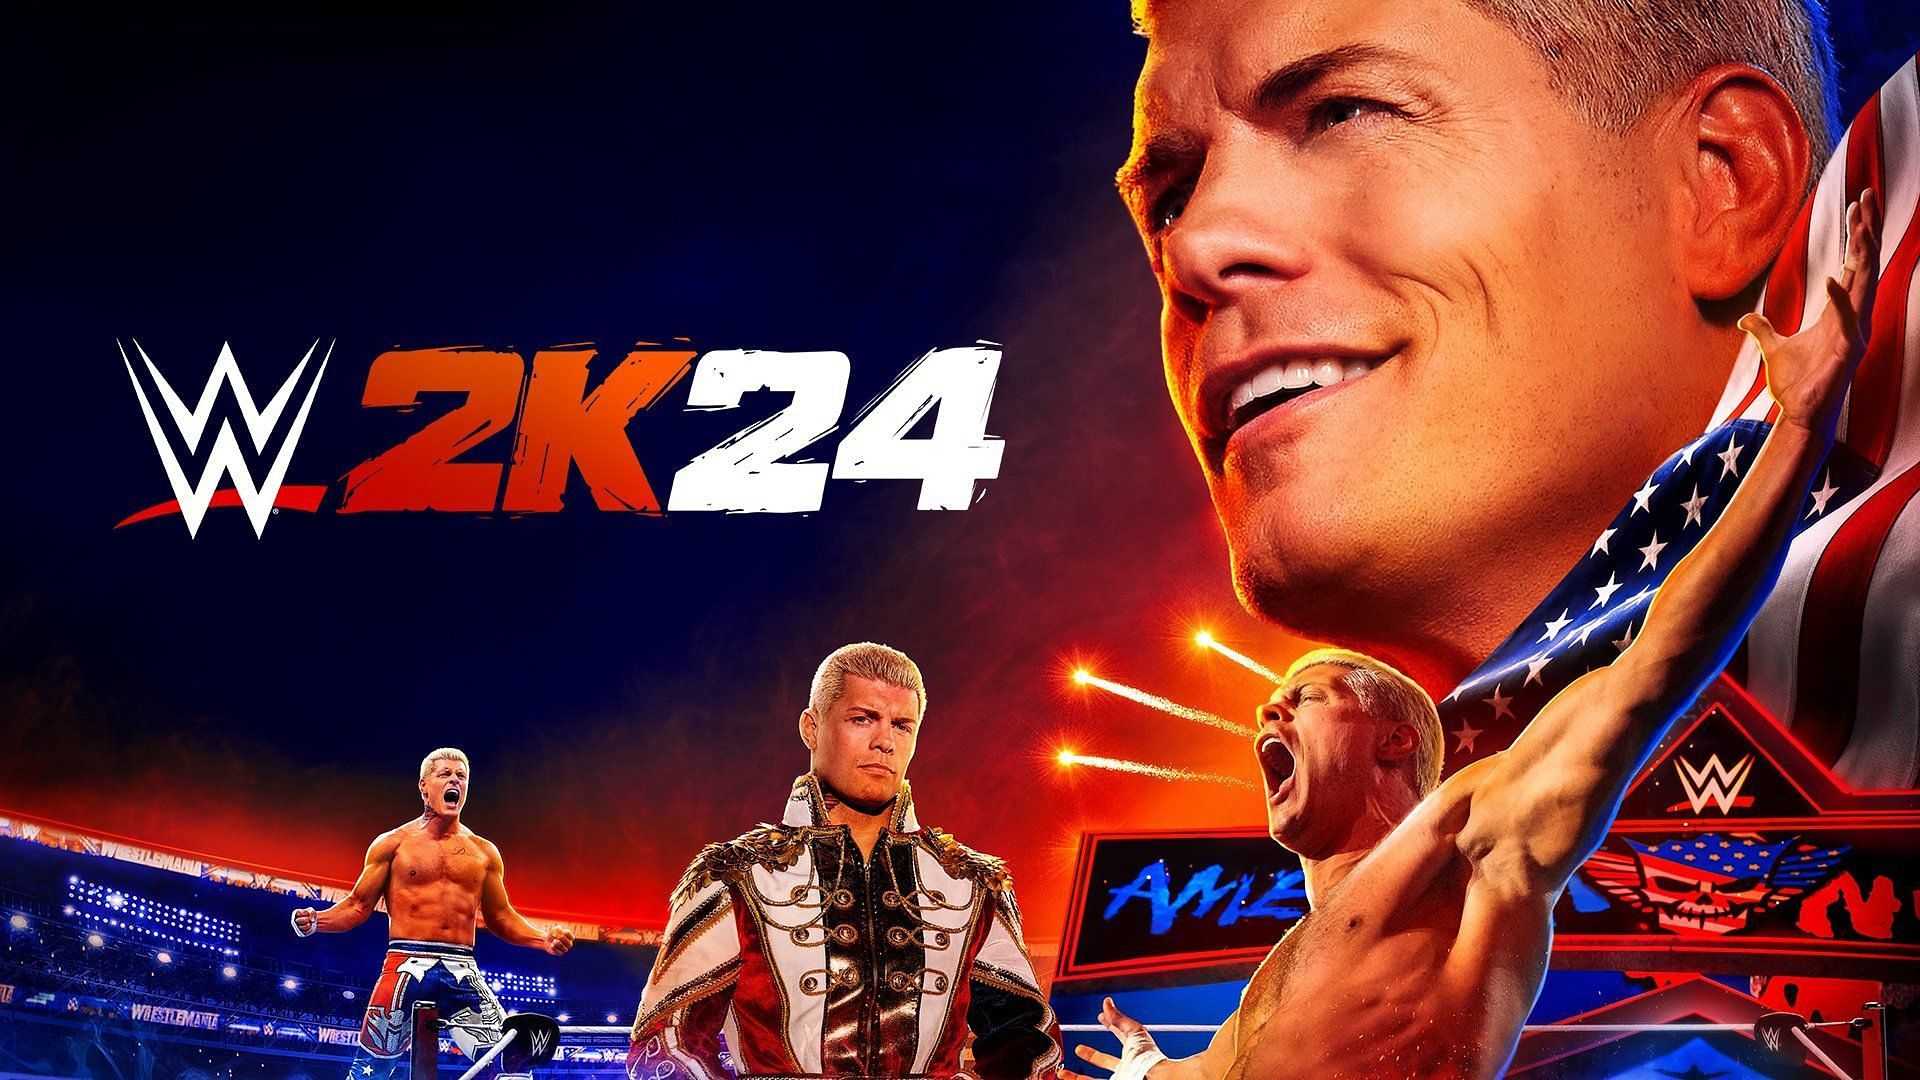 Cody Rhodes is the cover Superstar for WWE 2K24 Standard Edition